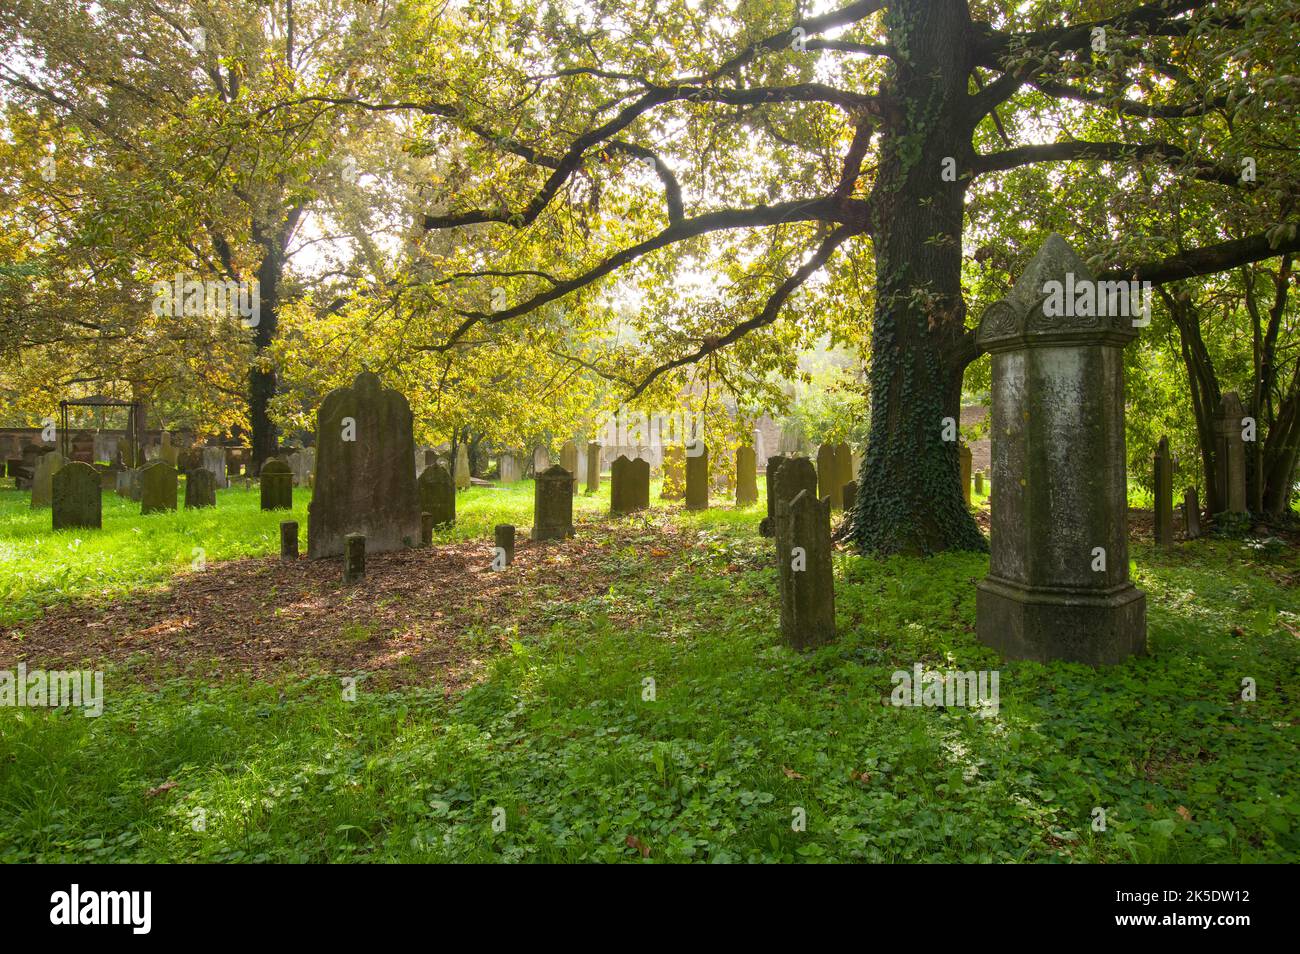 View of the old jewish cemetery in the town of Ferrara, Italy Stock Photo